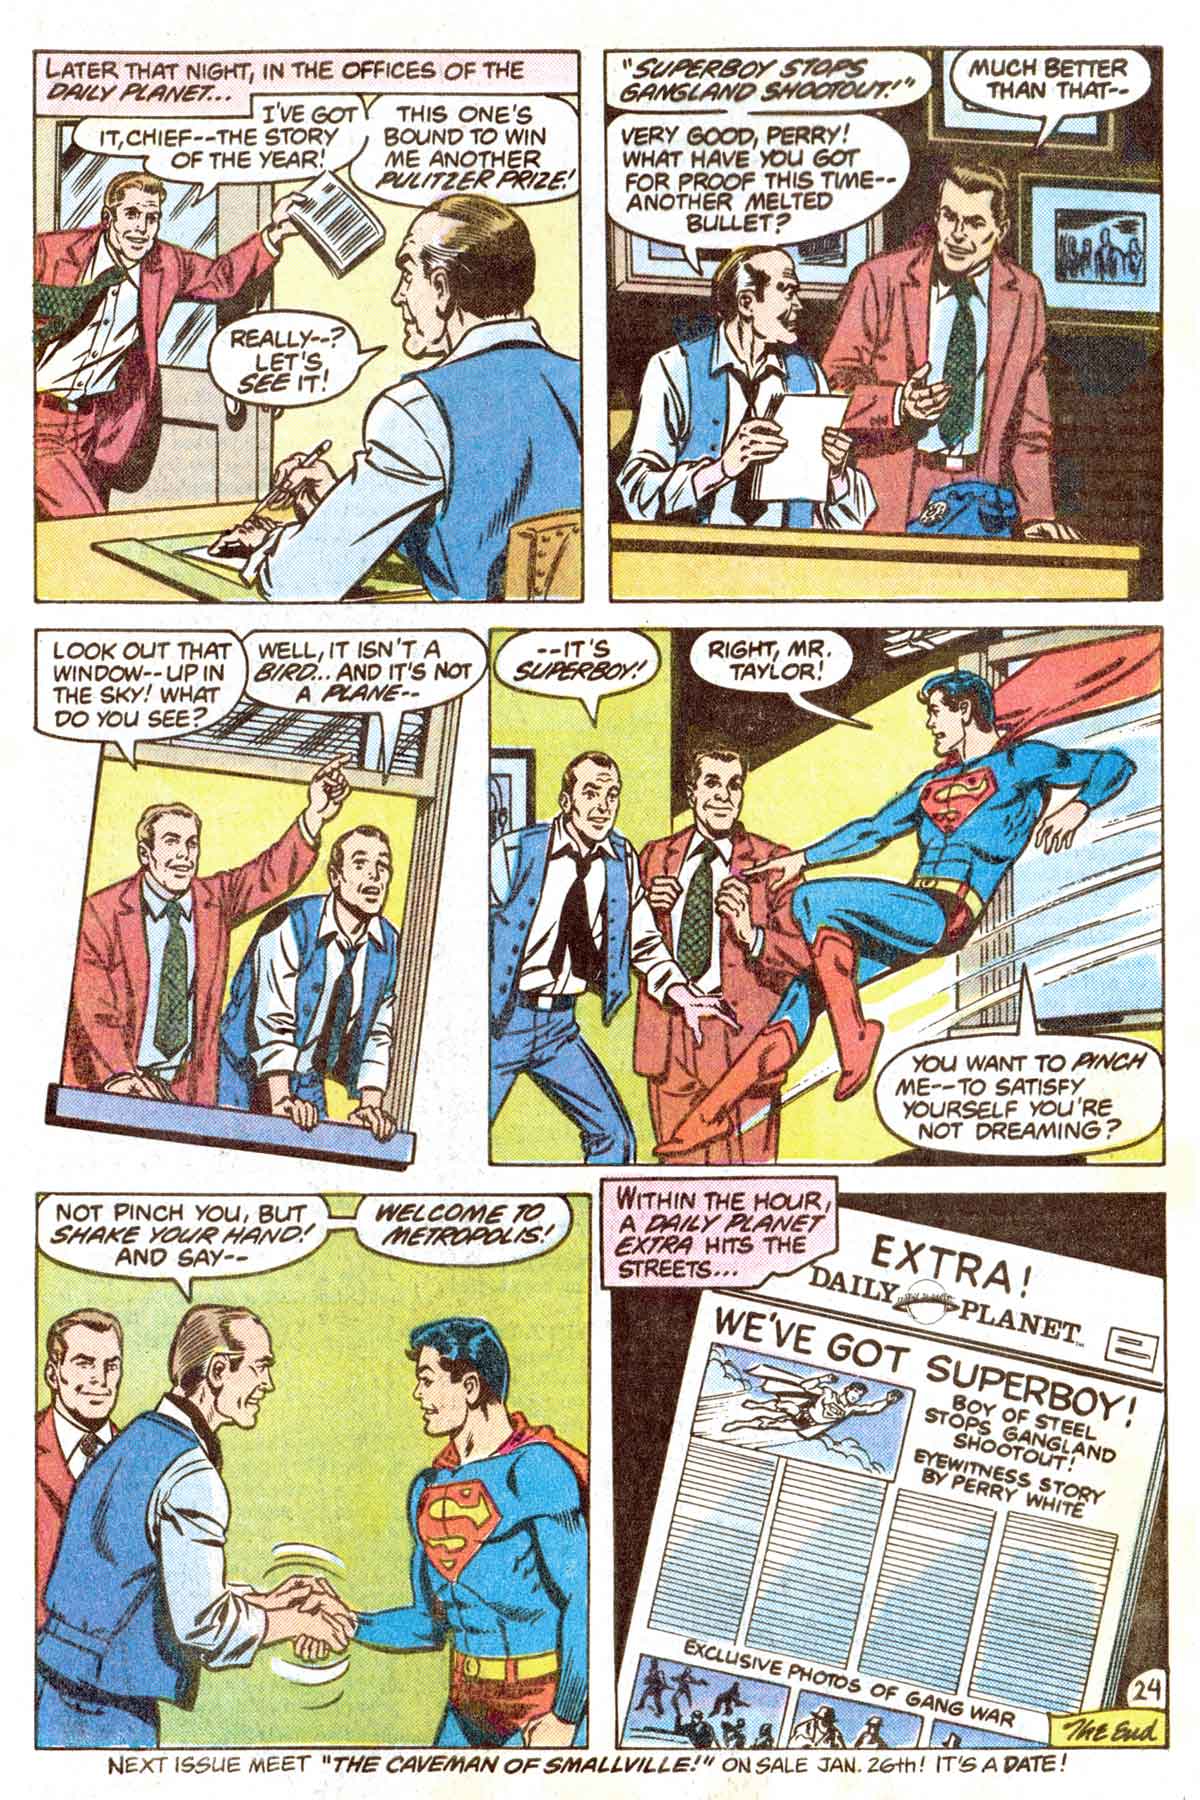 The New Adventures of Superboy 51 Page 25